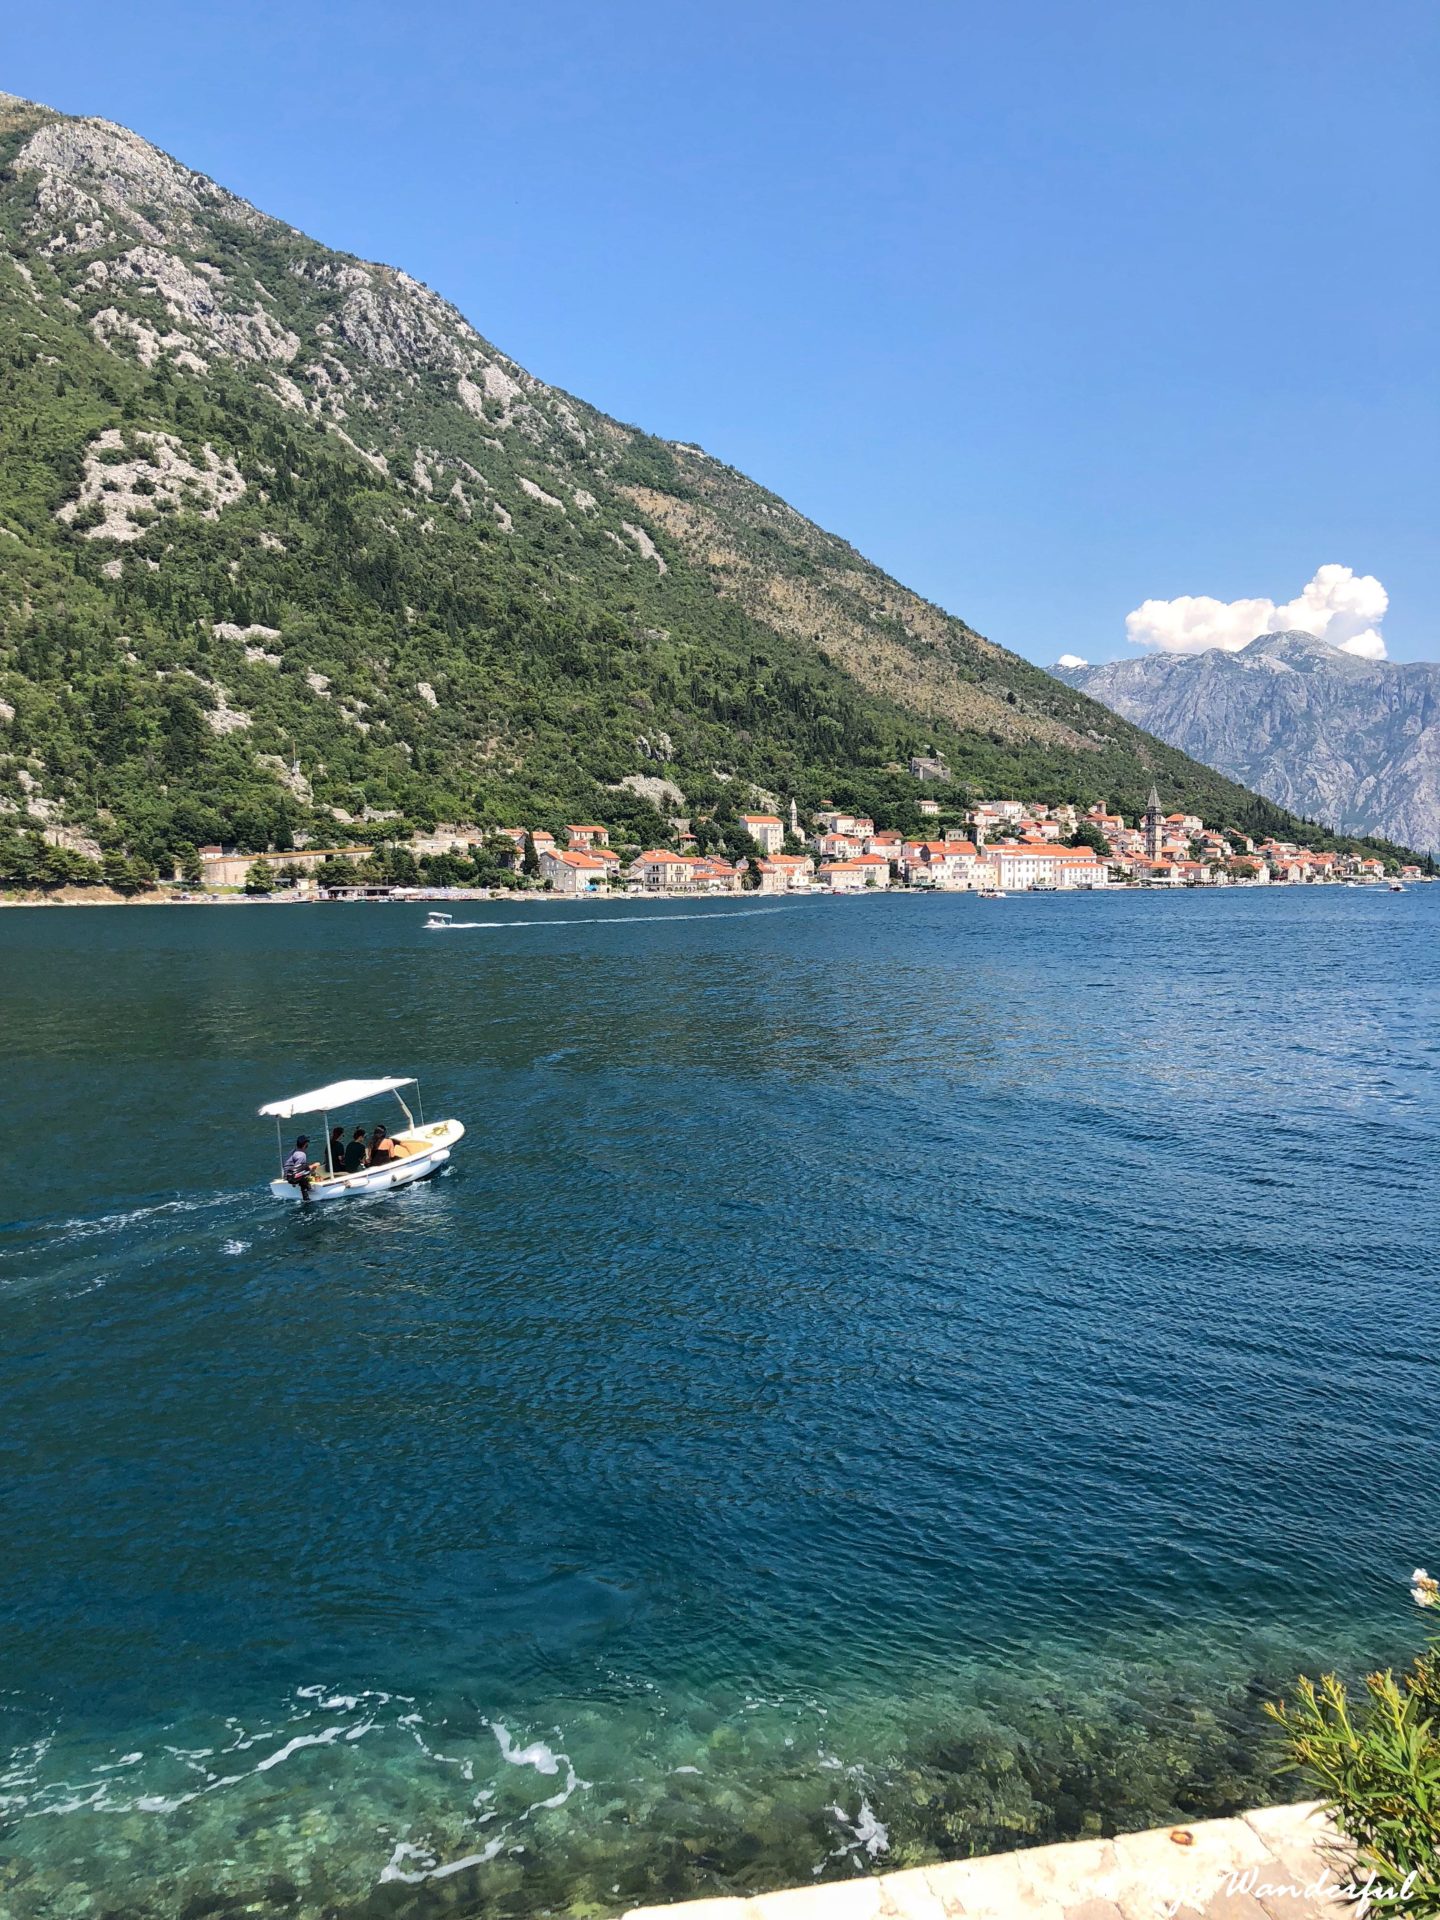 Boat trip to the islands - Things to do in Perast Montenegro